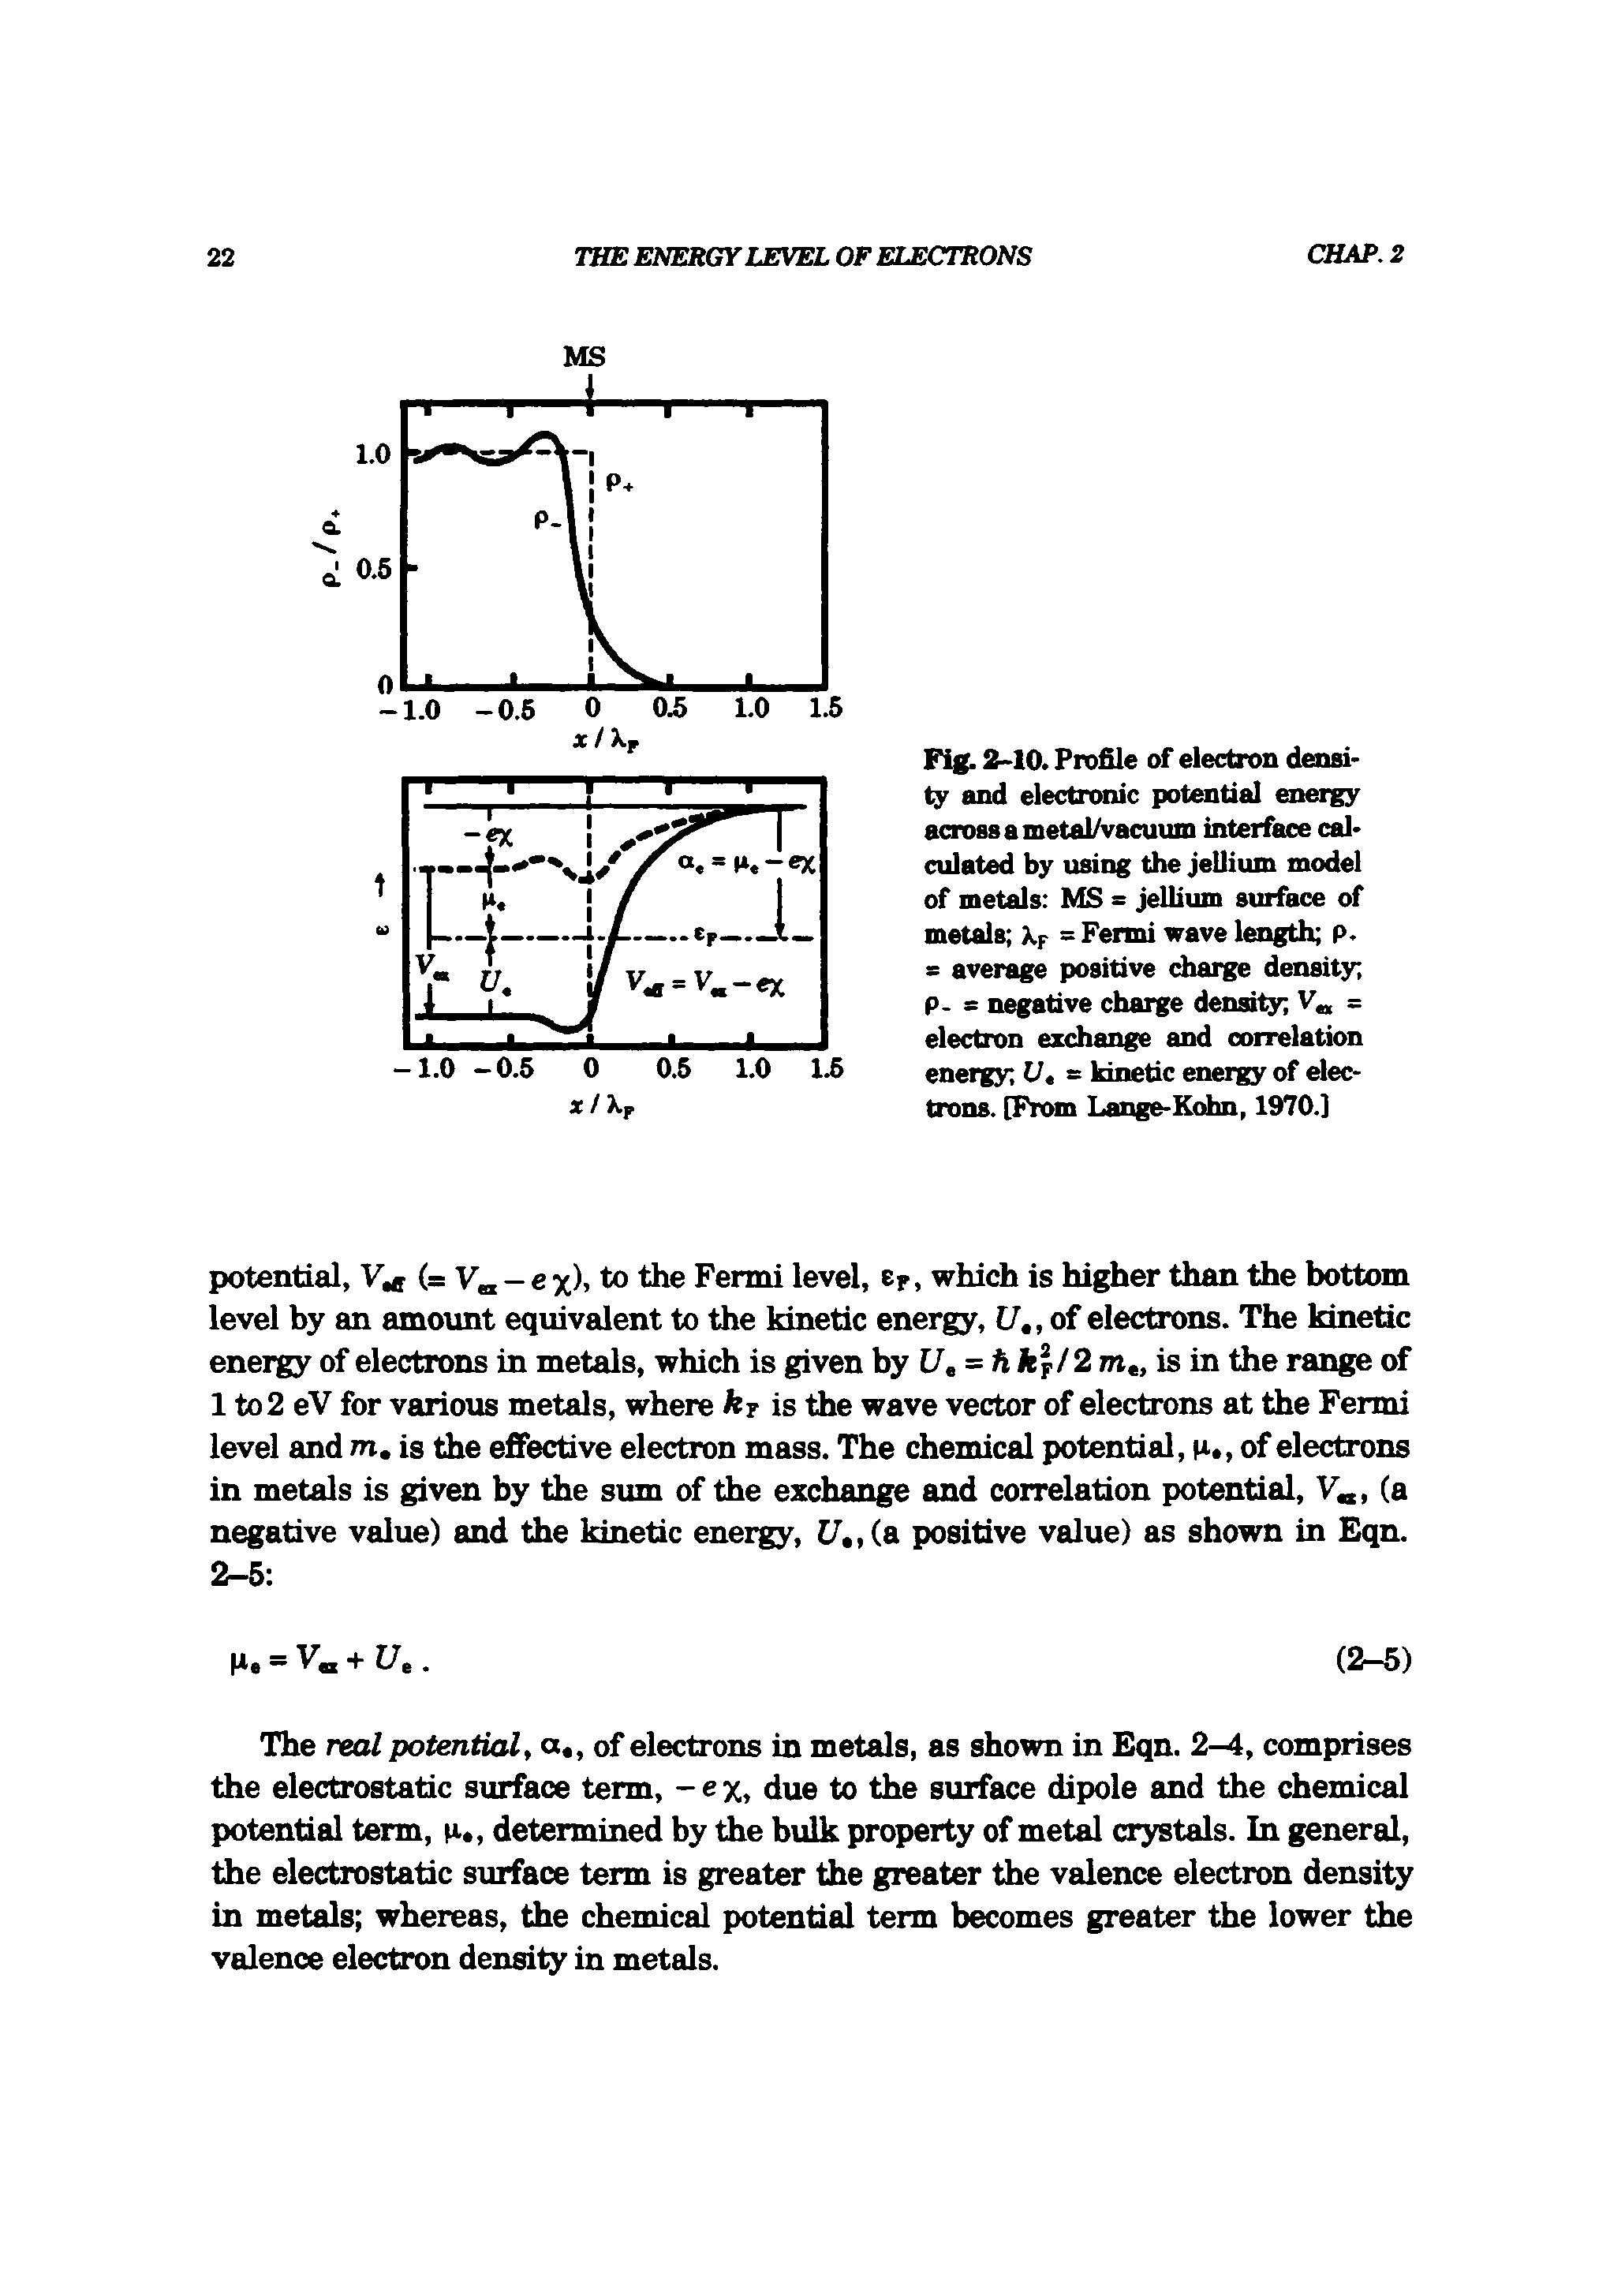 Fig. 2-10. Profile of electron density and electronic potential energy across a metal/vacuum interface calculated by using the jellium model of metals MS = jellium surface of metals Xf = Fermi wave length p. - average positive charge density P- s negative charge density V = electron exchange and correlation energy V, - kinetic energy of electrons. [From Lange-Kohn, 1970.]...